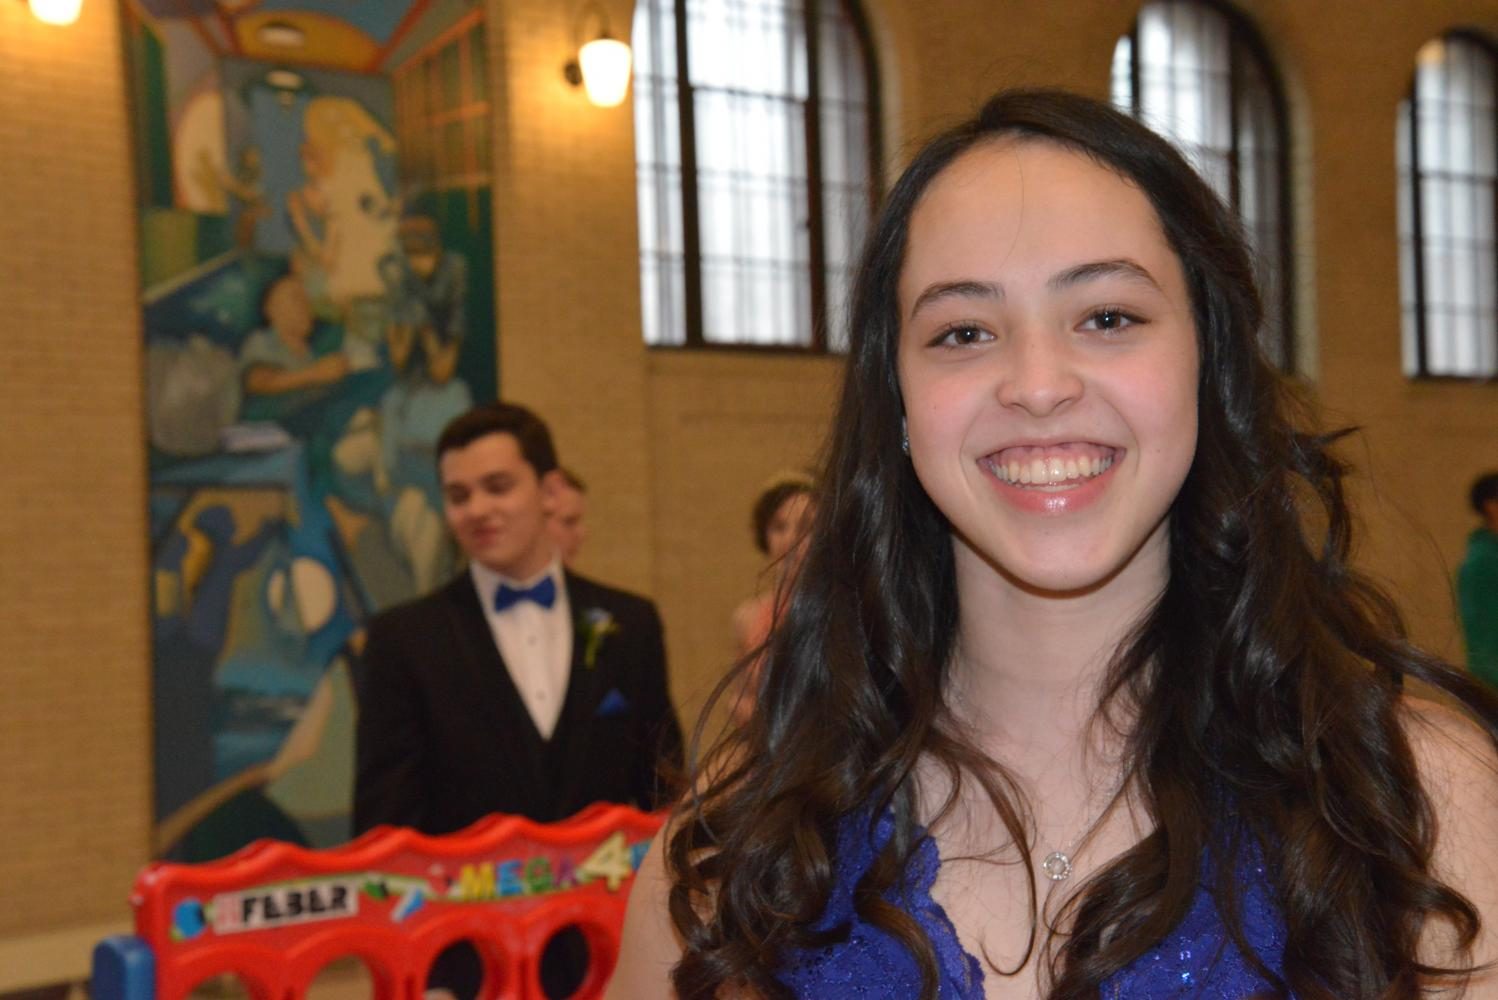 Junior Maya Shrestha wore her hair in soft curls to prom when she was in 9th grade.